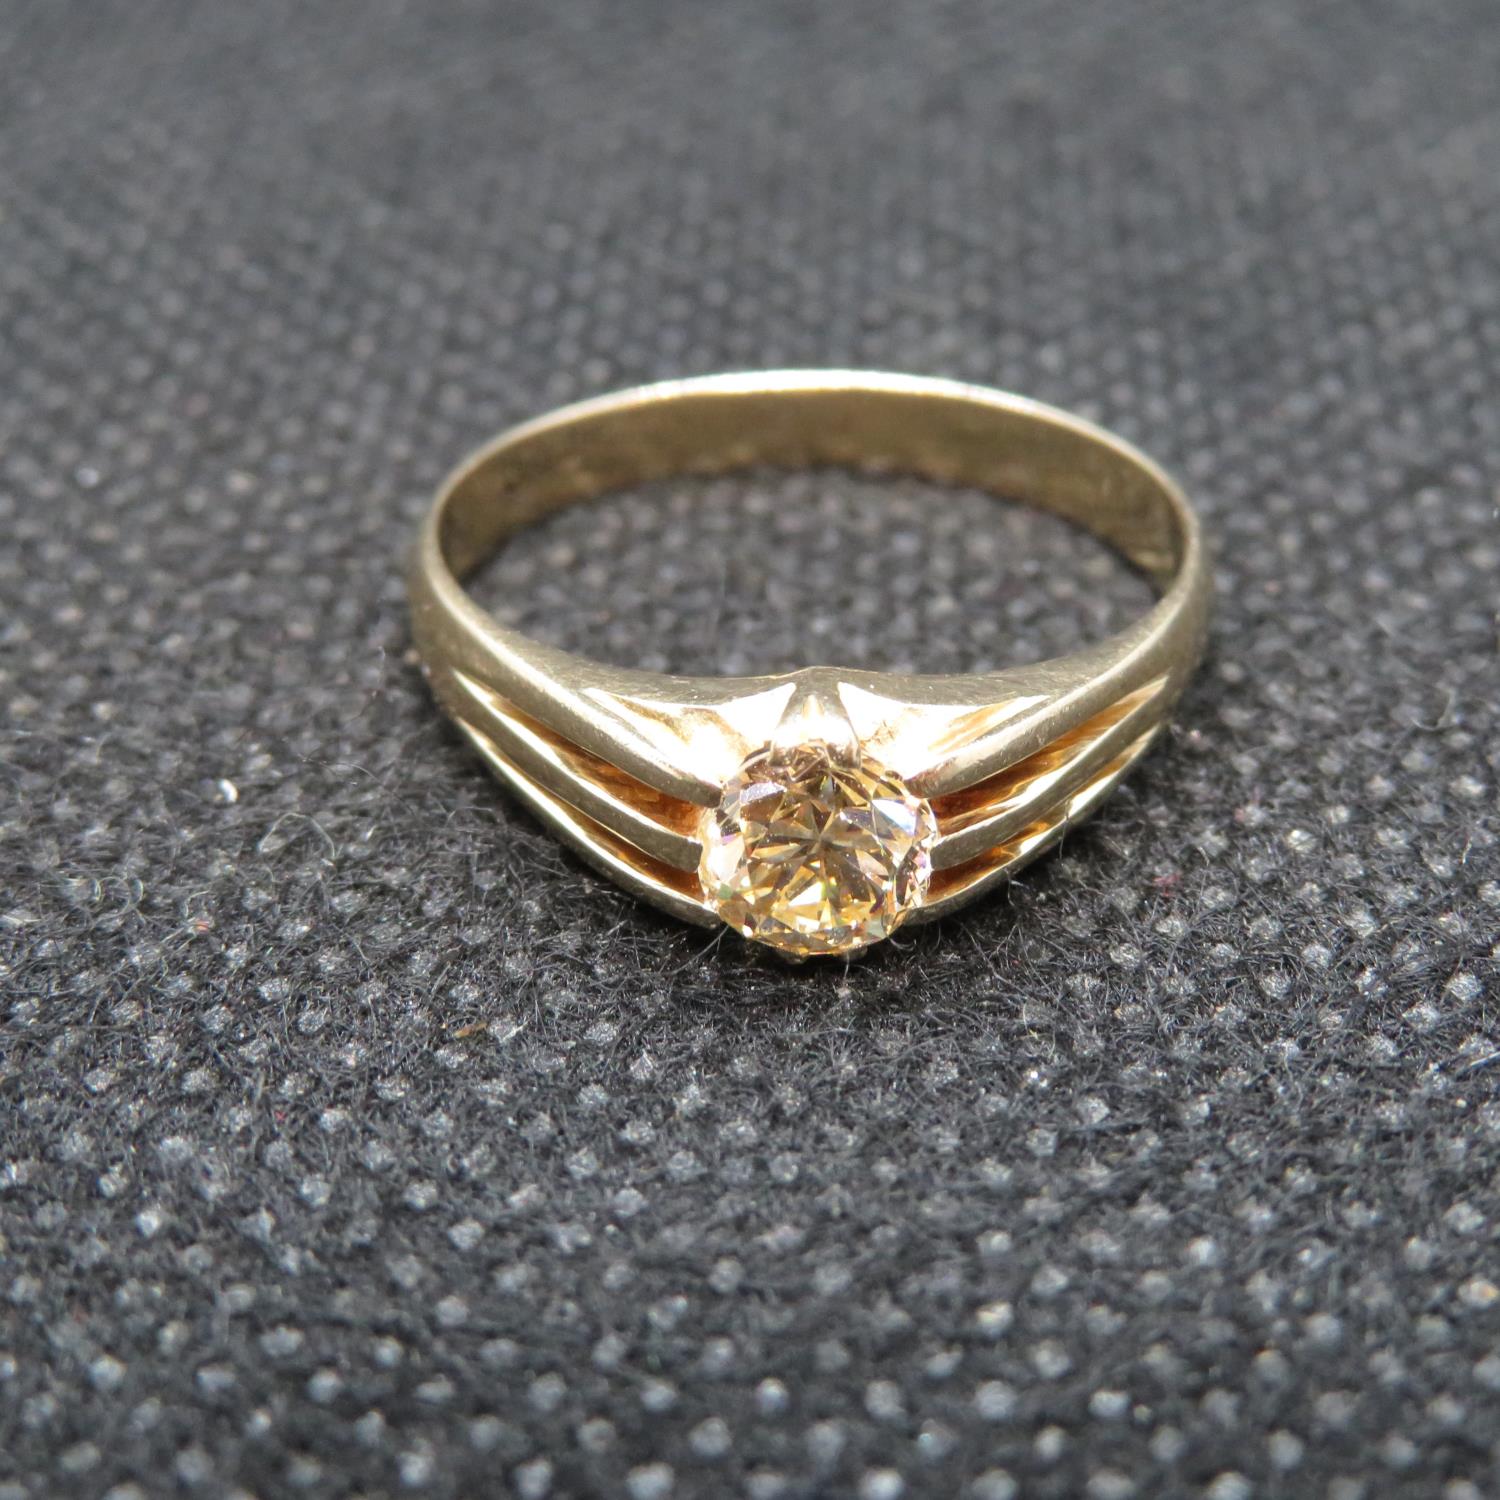 Antique 18ct gold ring set with champagne diamond over .5ct 5.25mm spread size R - Image 2 of 3